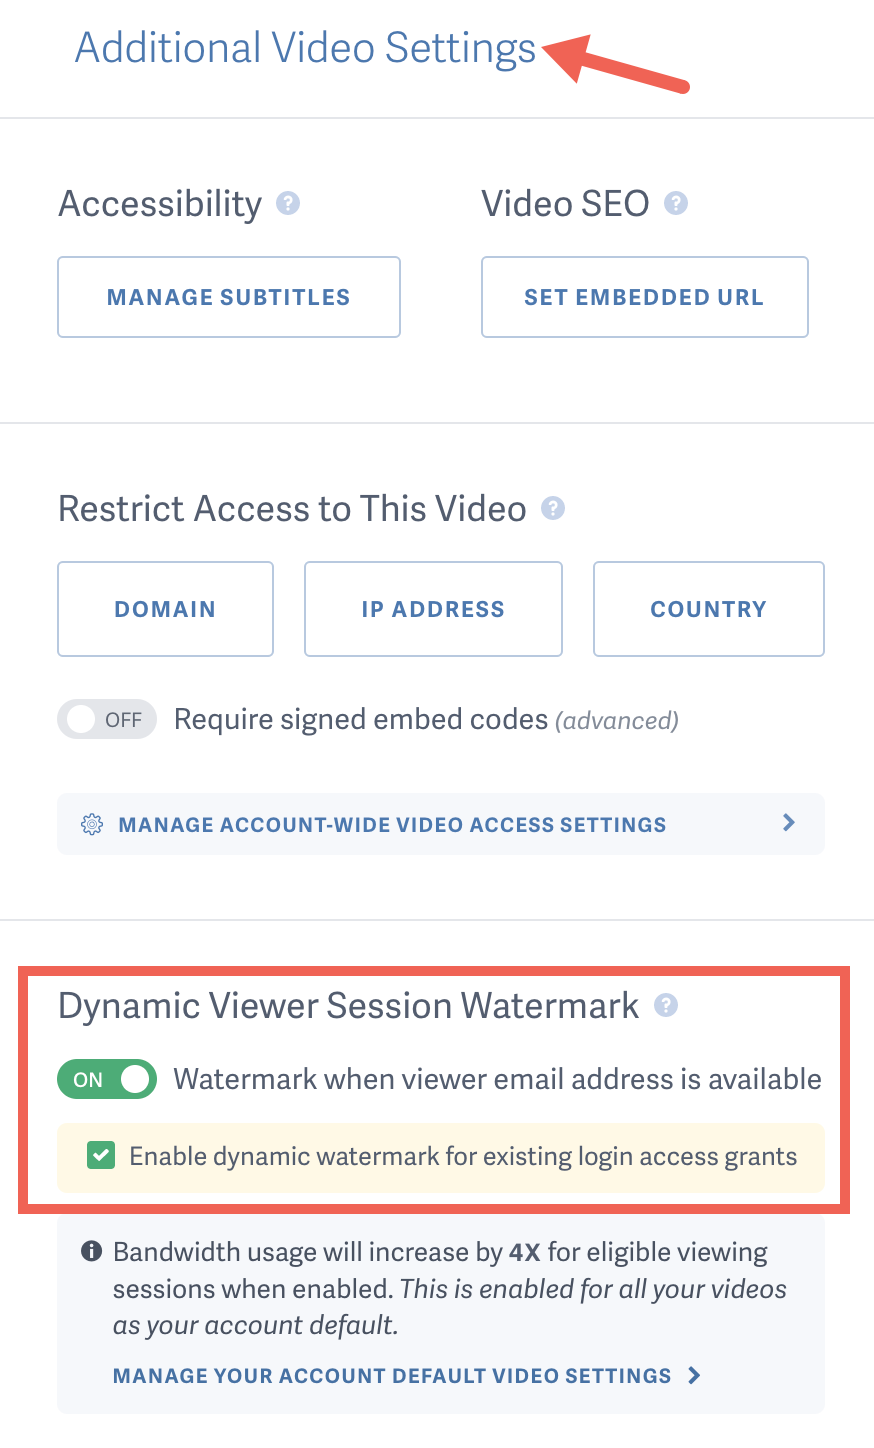 Enable a Dynamic Watermark for existing Viewer Logins per video